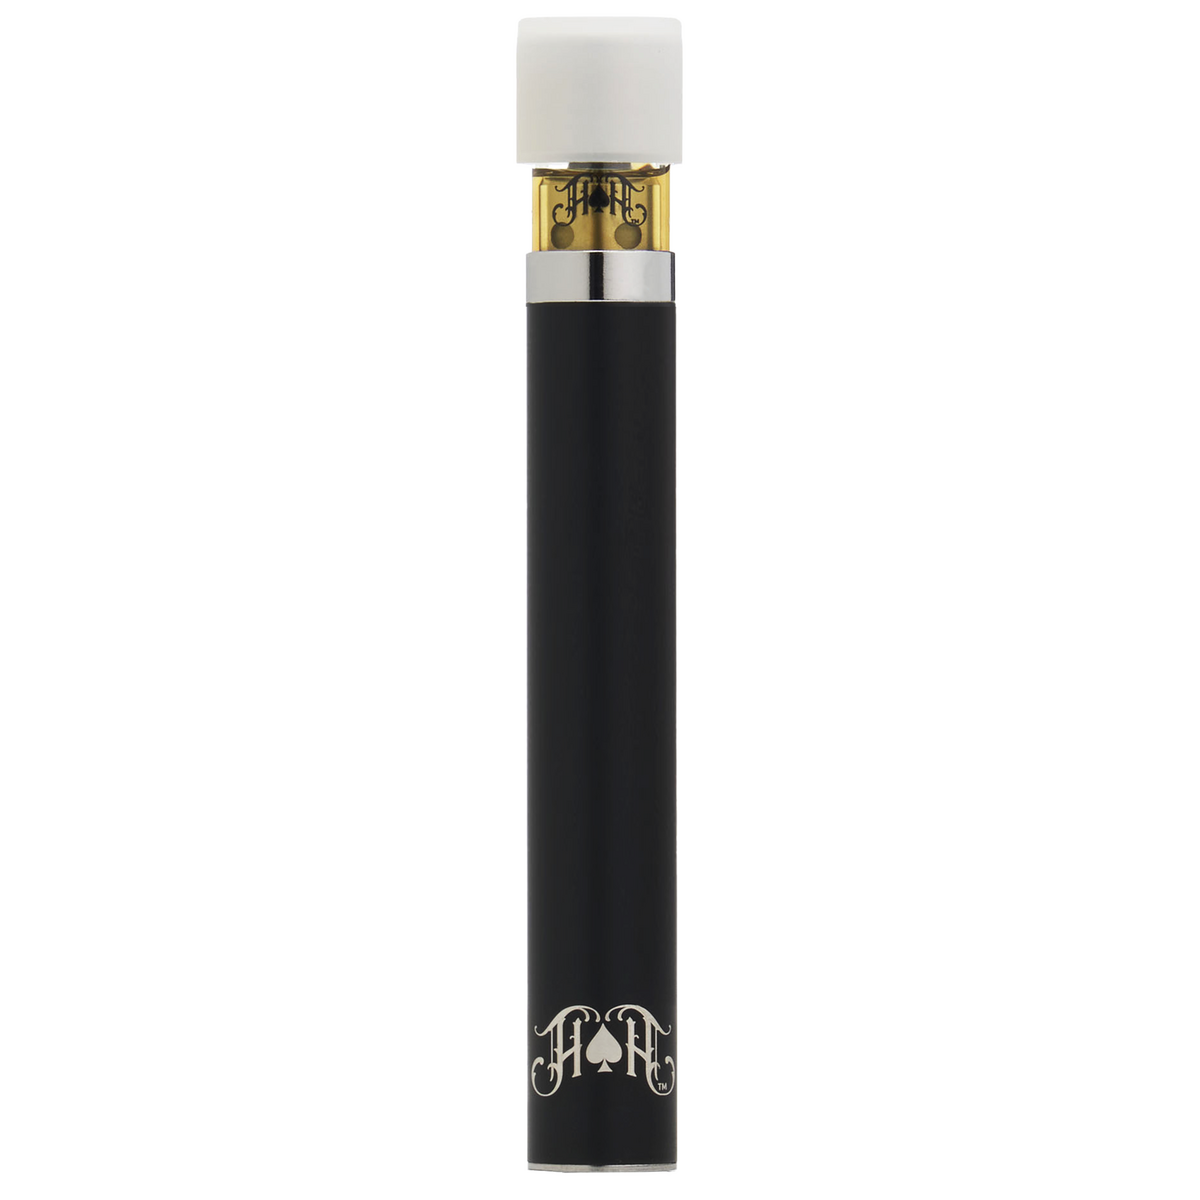 Cloudberry | Indica - Ultra Extract High Potency Oil - 0.3G All-In-One Vape